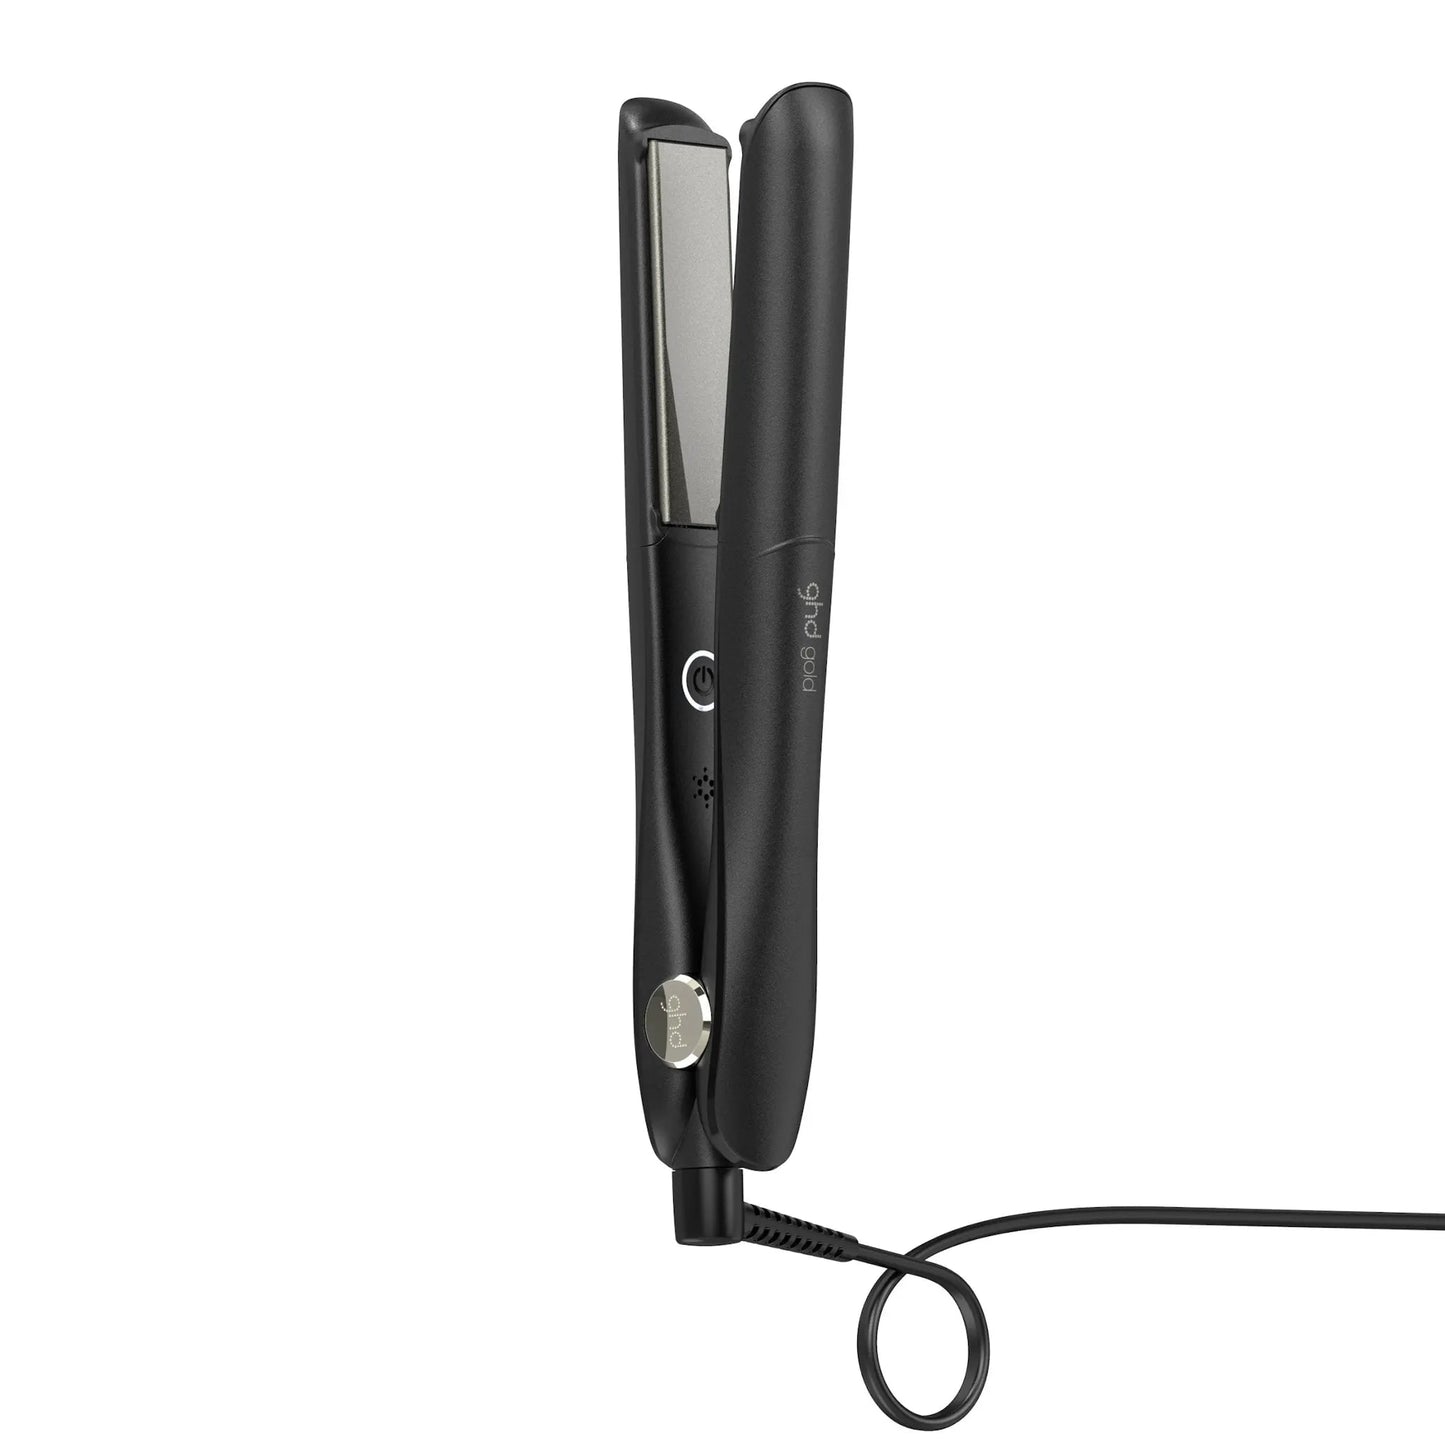 GHD Gold Professional Styler - Black - shelley and co